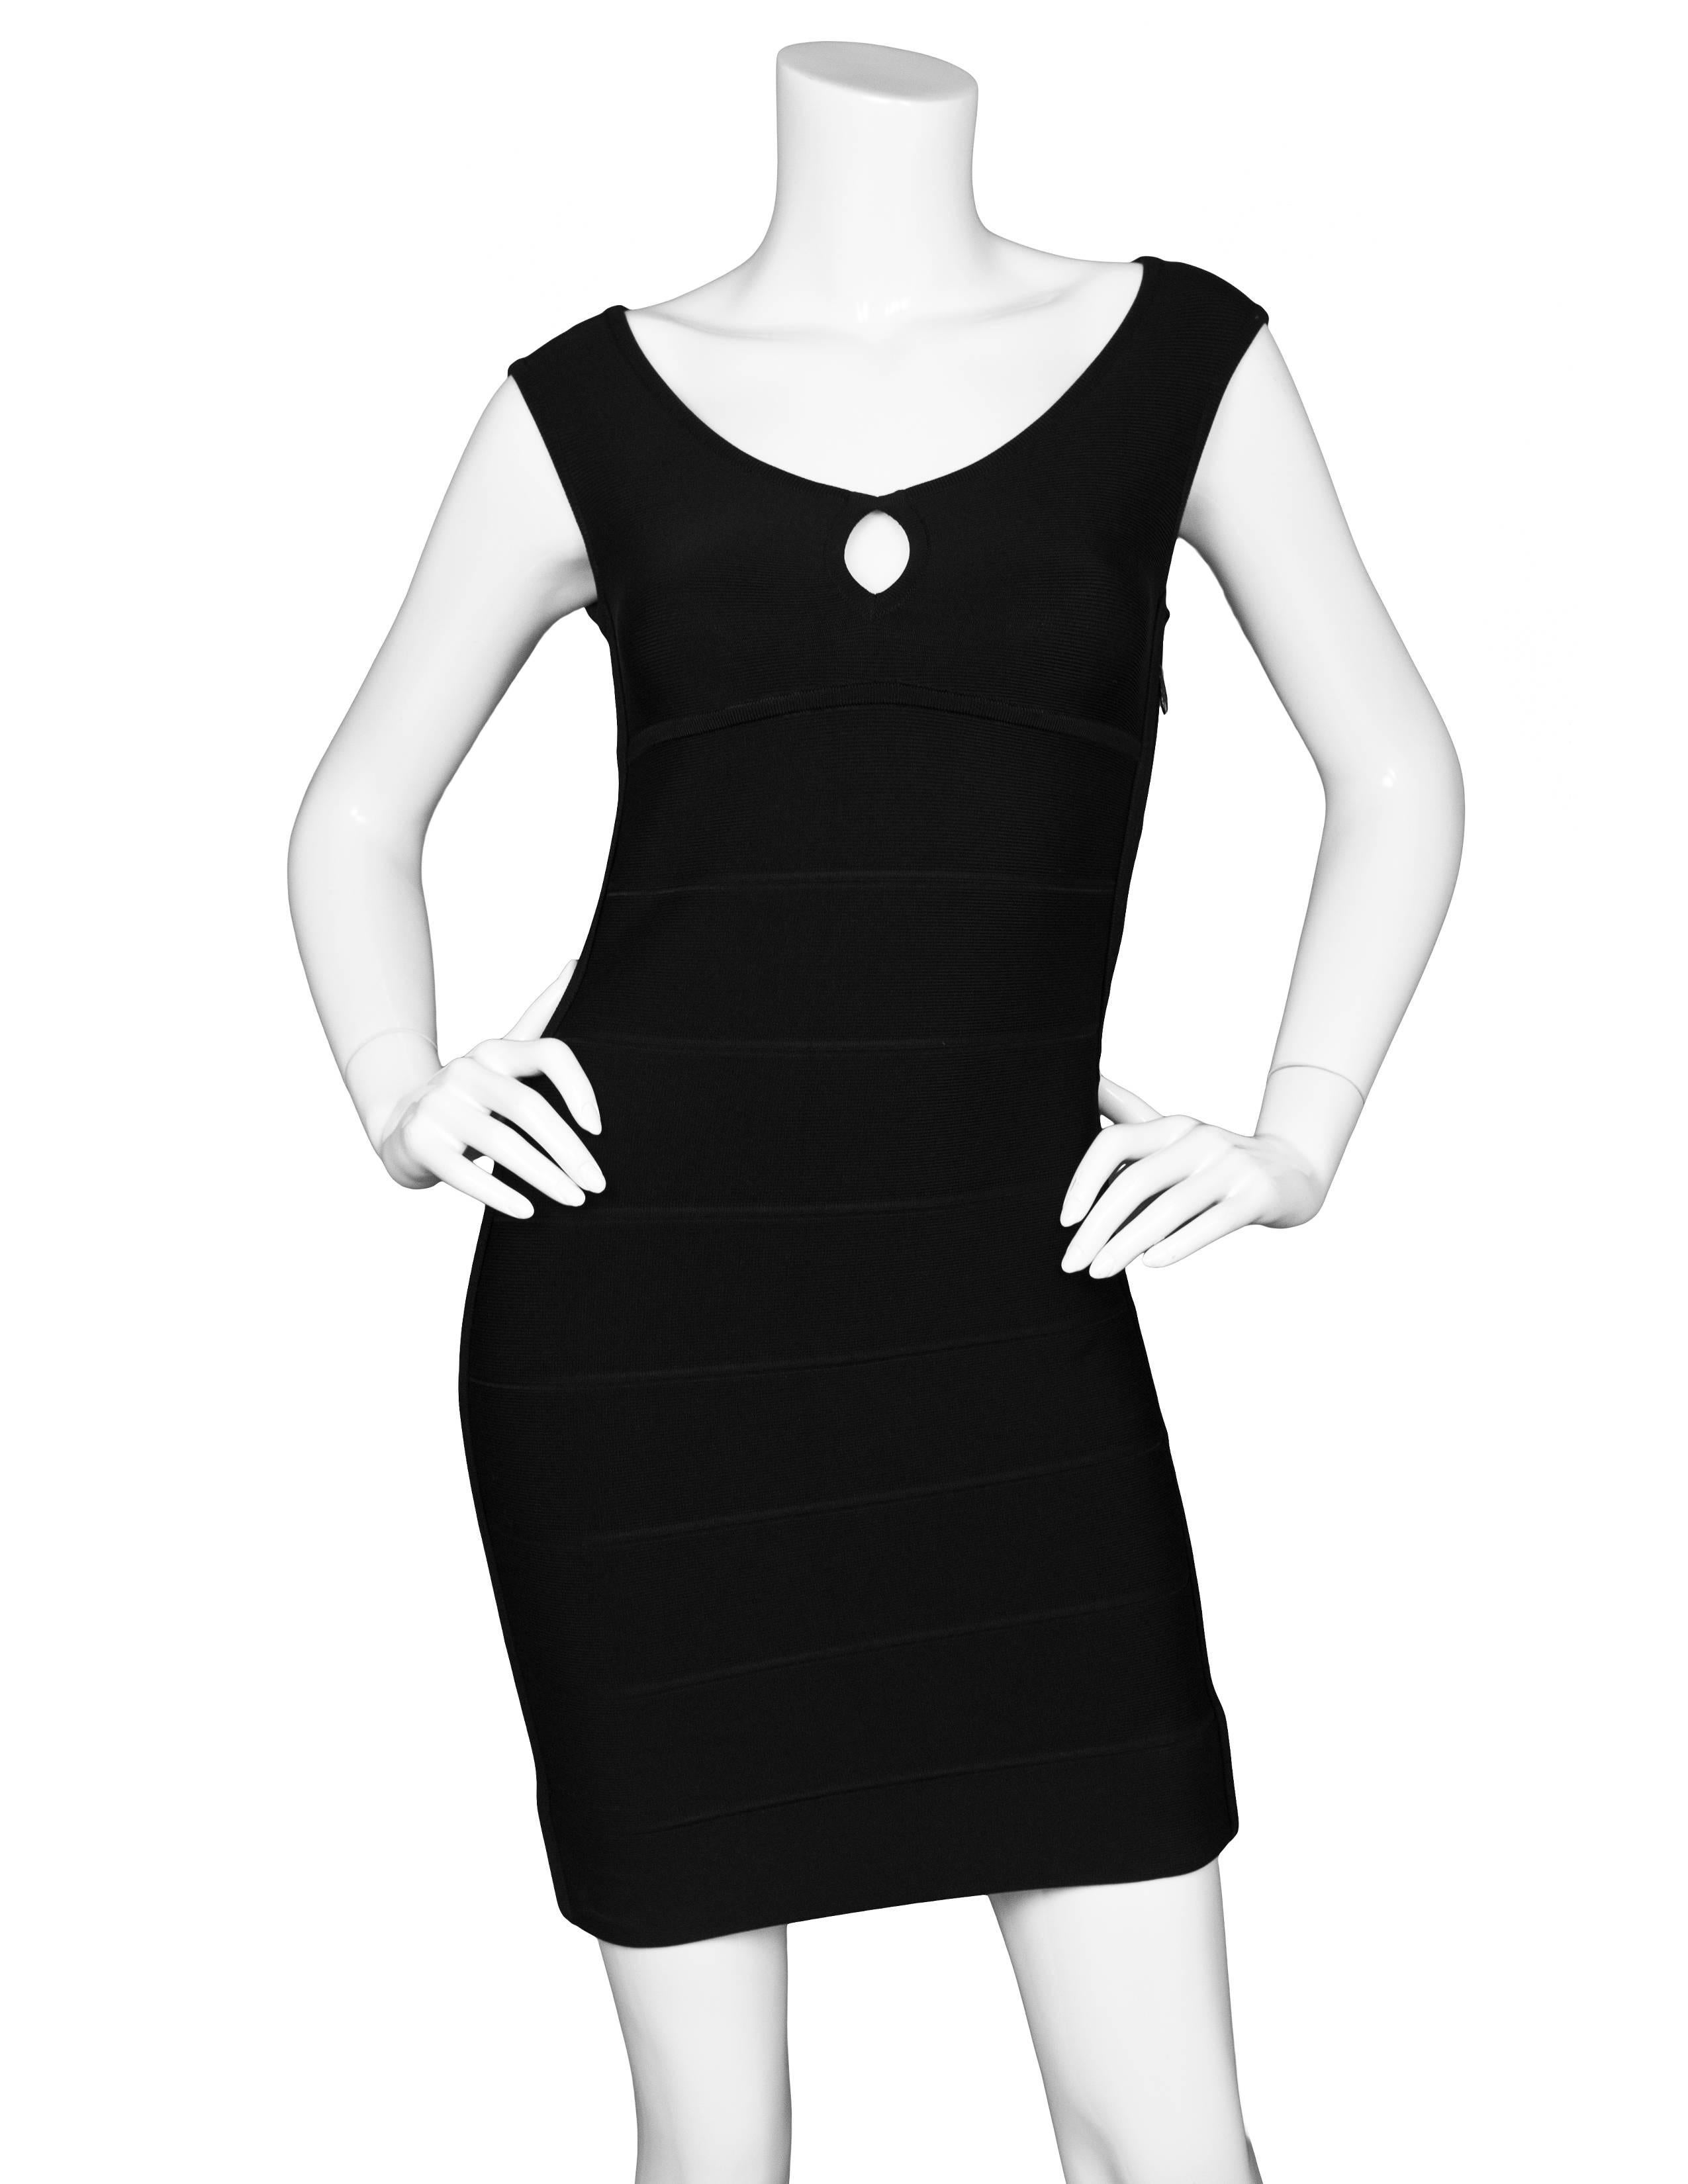 Herve Leger Black Bandage Dress Sz S

Made In: China
Color: Black
Composition: 90% Rayon, 9% Nylon, 1% Spandex
Lining: None
Closure/Opening: Zip closure at side
Overall Conditon: Excellent pre-owned condition with the exception of being